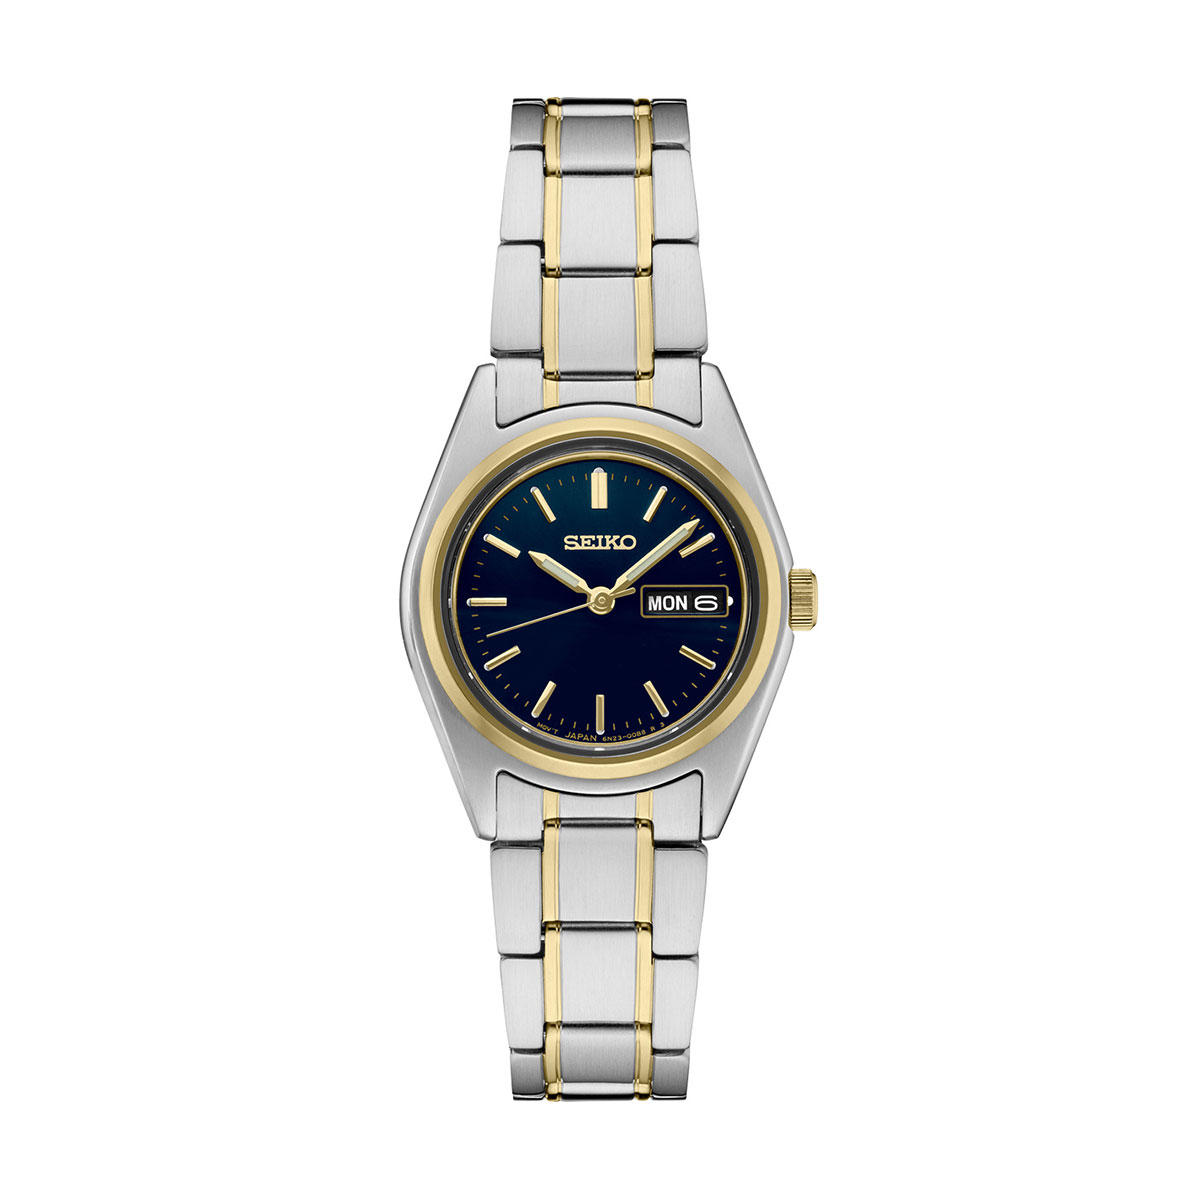 involveret behagelig kind Seiko Essentials 25.5mm Two Tone Stainless Steel Watch, Blue Sunray Dial |  SUR436 | Borsheims